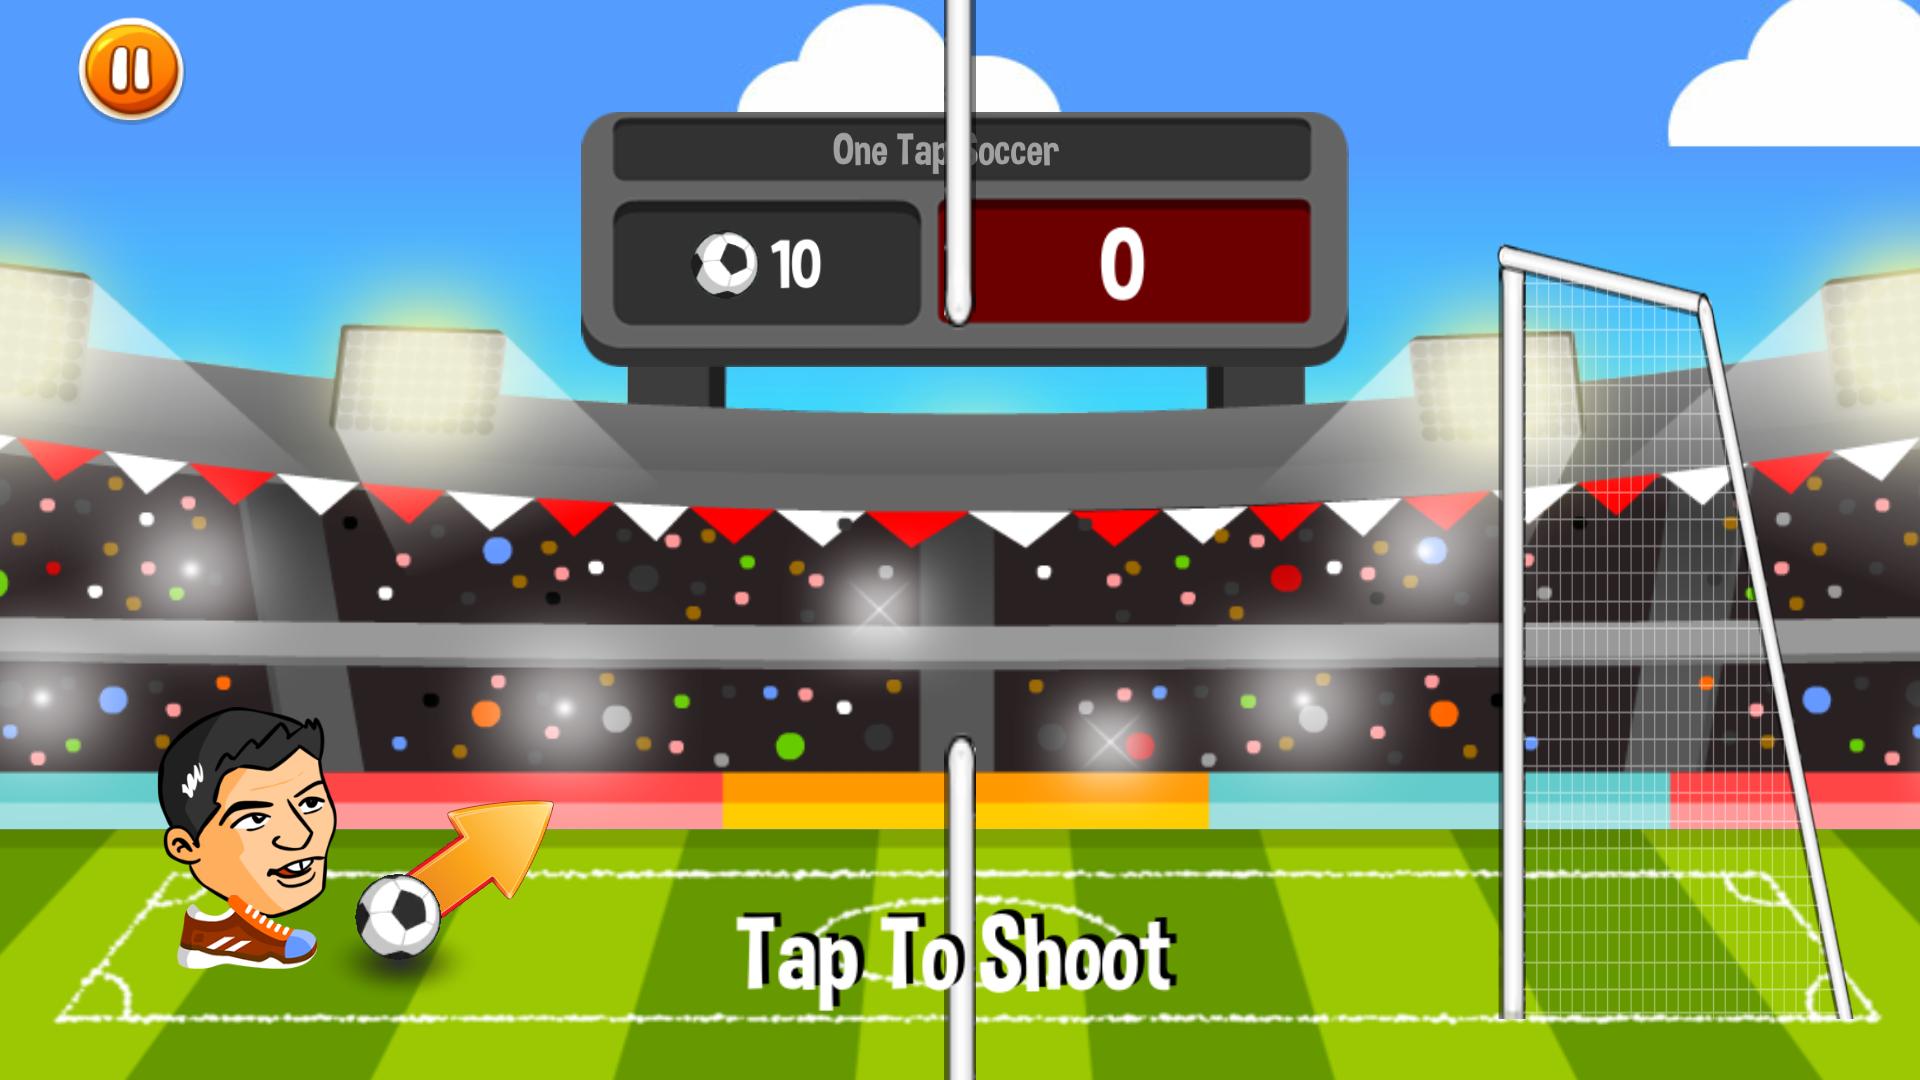 Head Soccer игра. Создание игры футбол Unity. Тапс. Tap head Android. One tap gaming